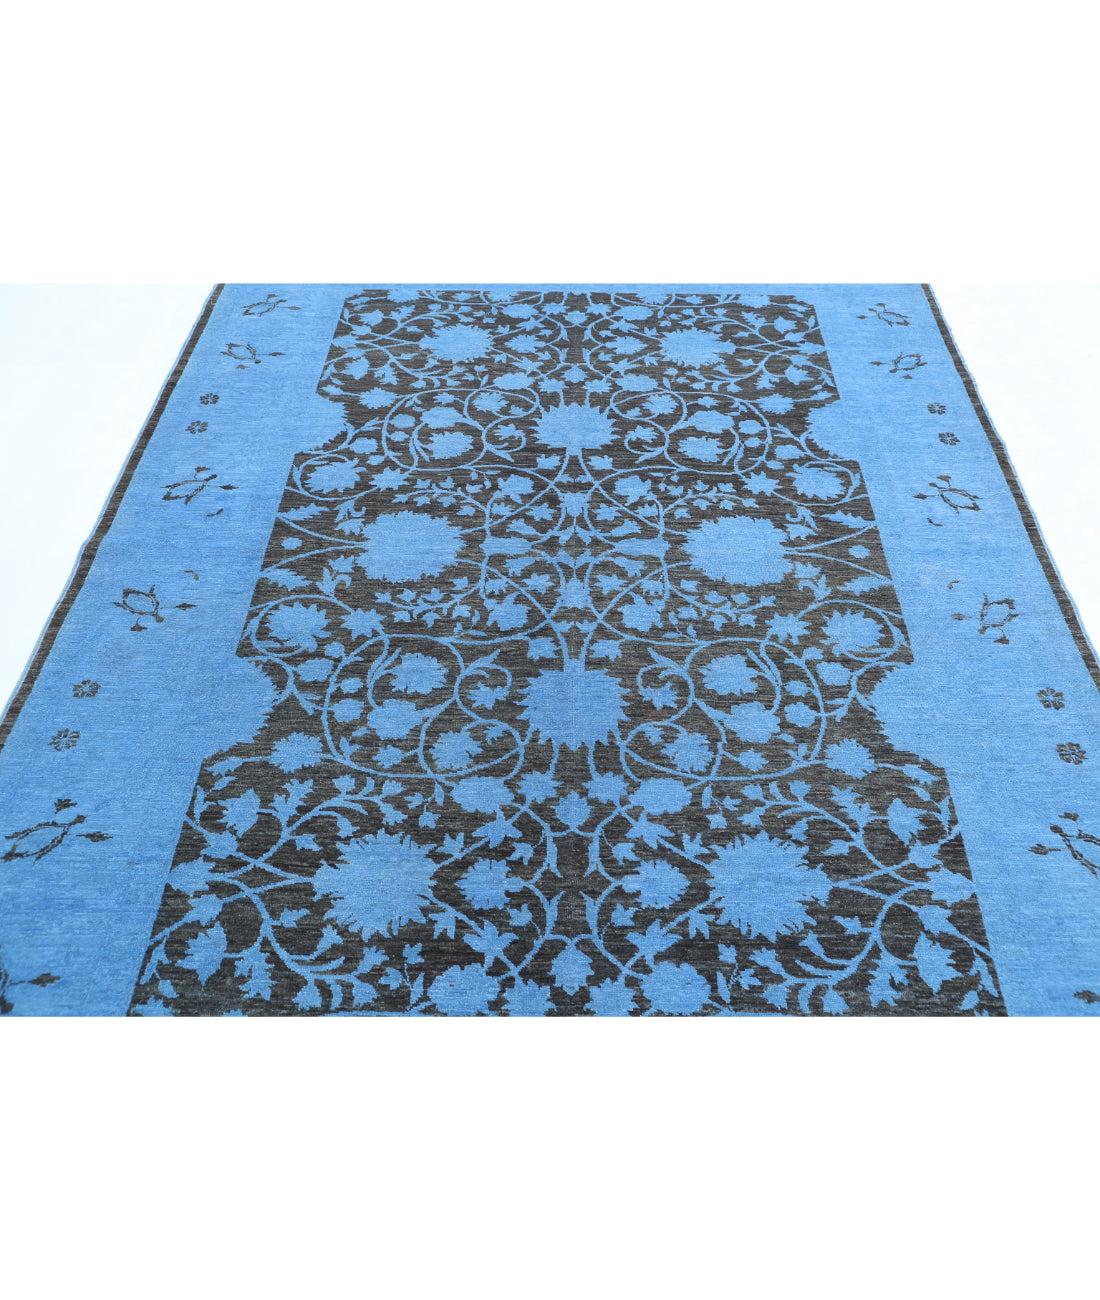 Hand Knotted Overdye Wool Rug - 6'2'' x 8'1'' 6'2'' x 8'1'' (185 X 243) / Blue / Blue